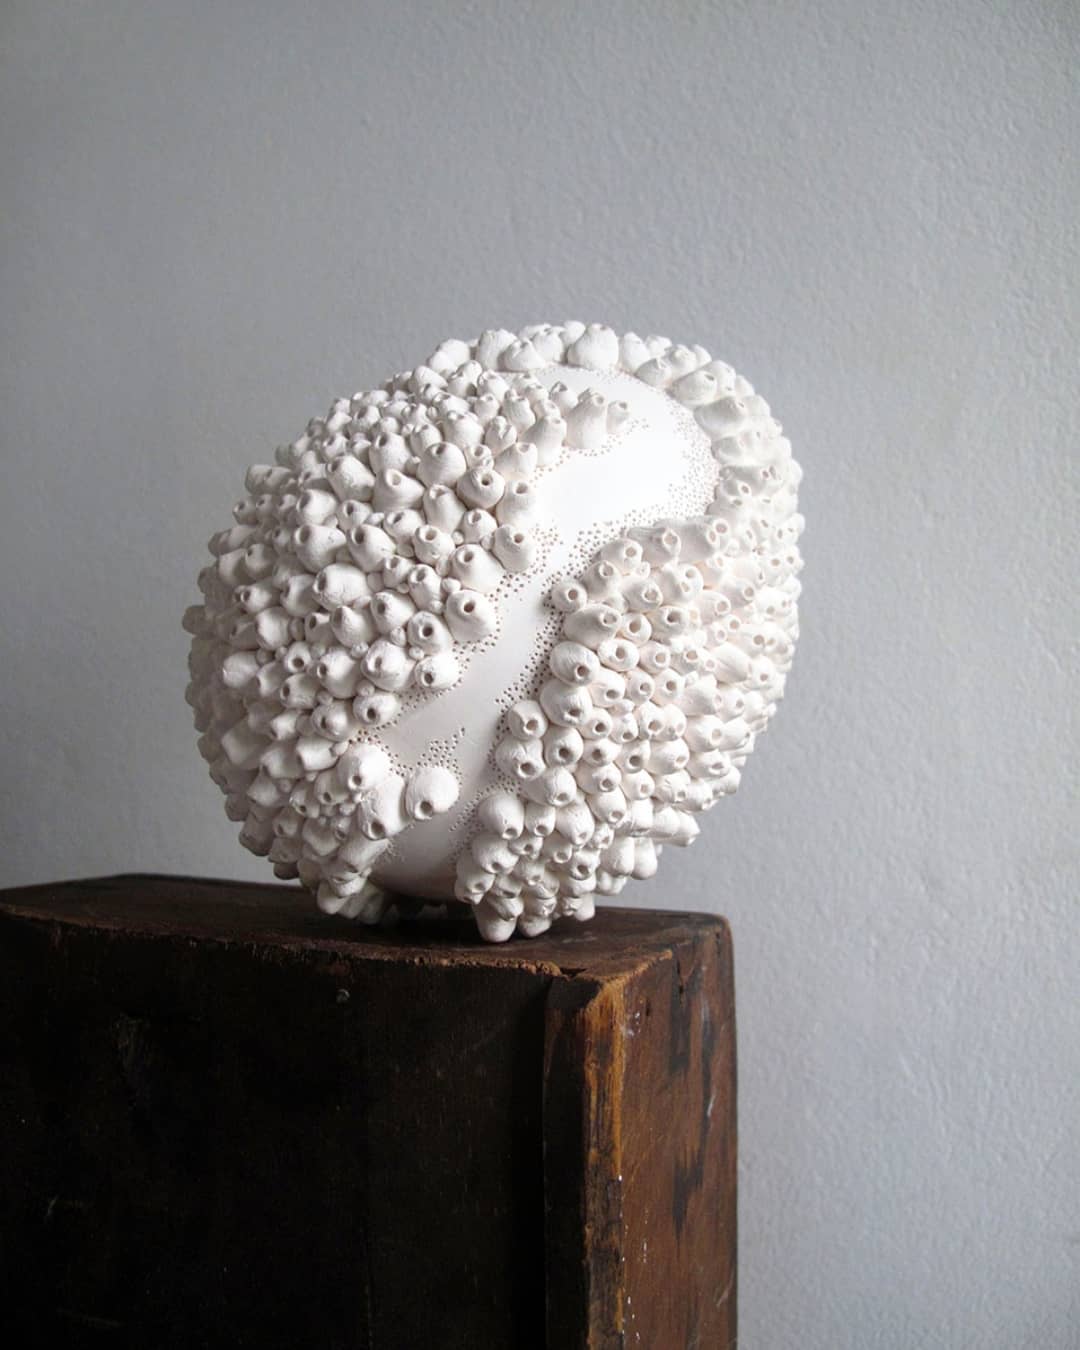 The Intriguing And Unique Ceramic Art The Plays With Organic Shapes Of Anna Whitehouse 1